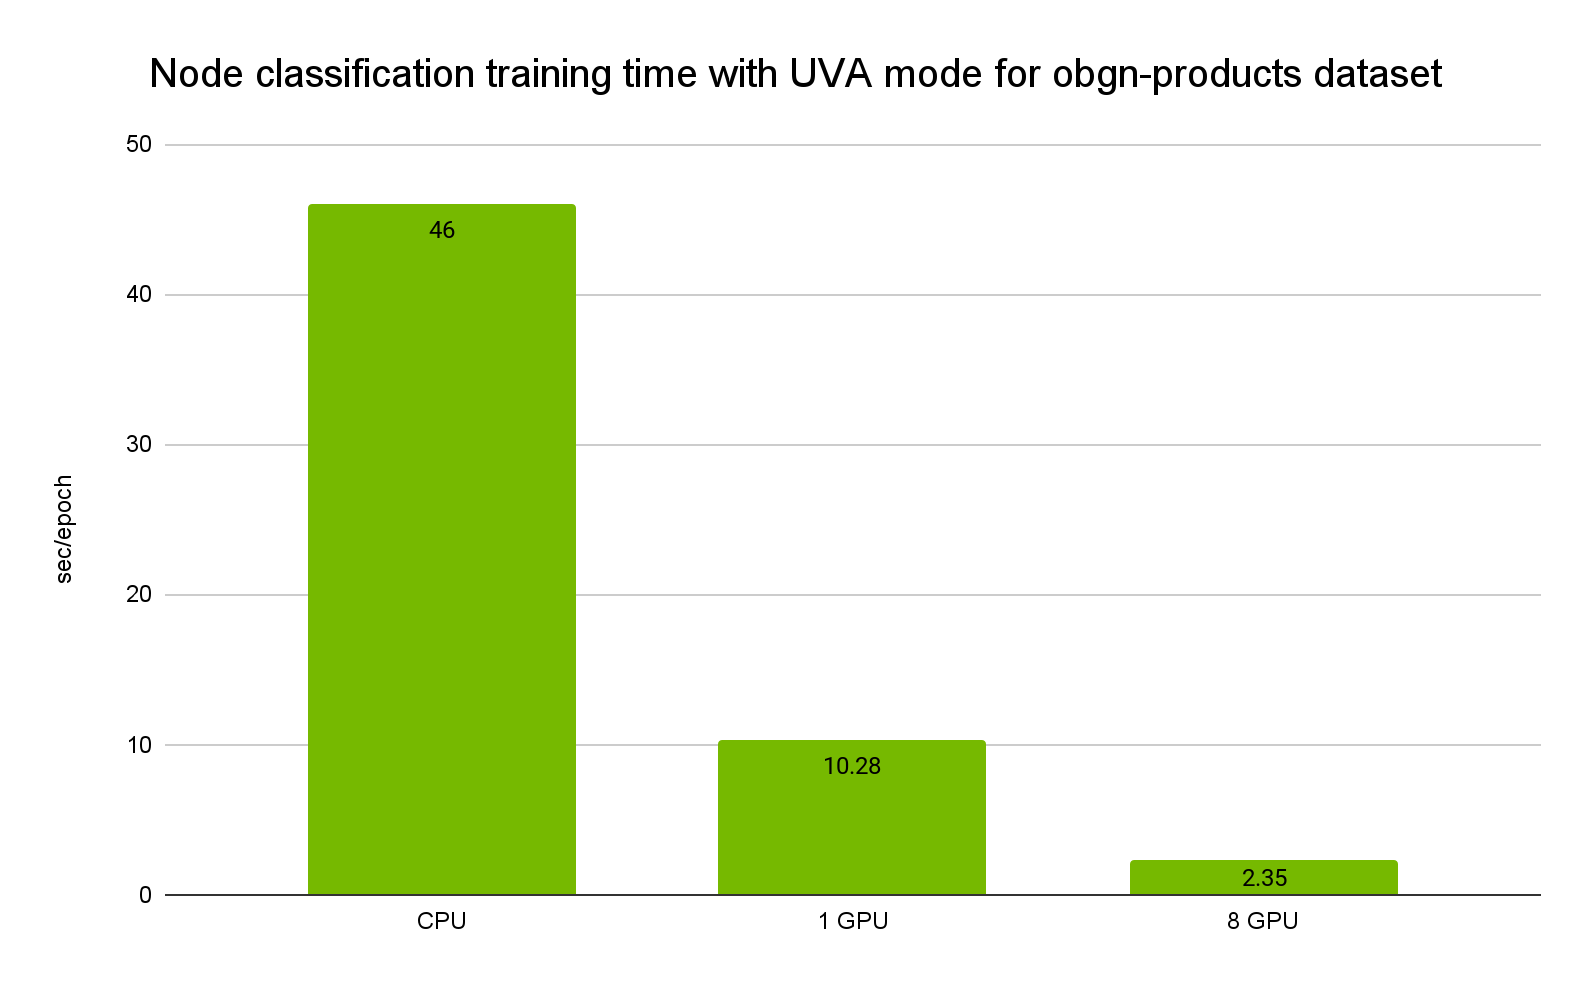 A bar graph compares the training times in sec/epoch for the obgn-products dataset with UVA mode on CPU (46 seconds), one GPU (10.28 seconds), and eight GPUs (2.35 seconds).